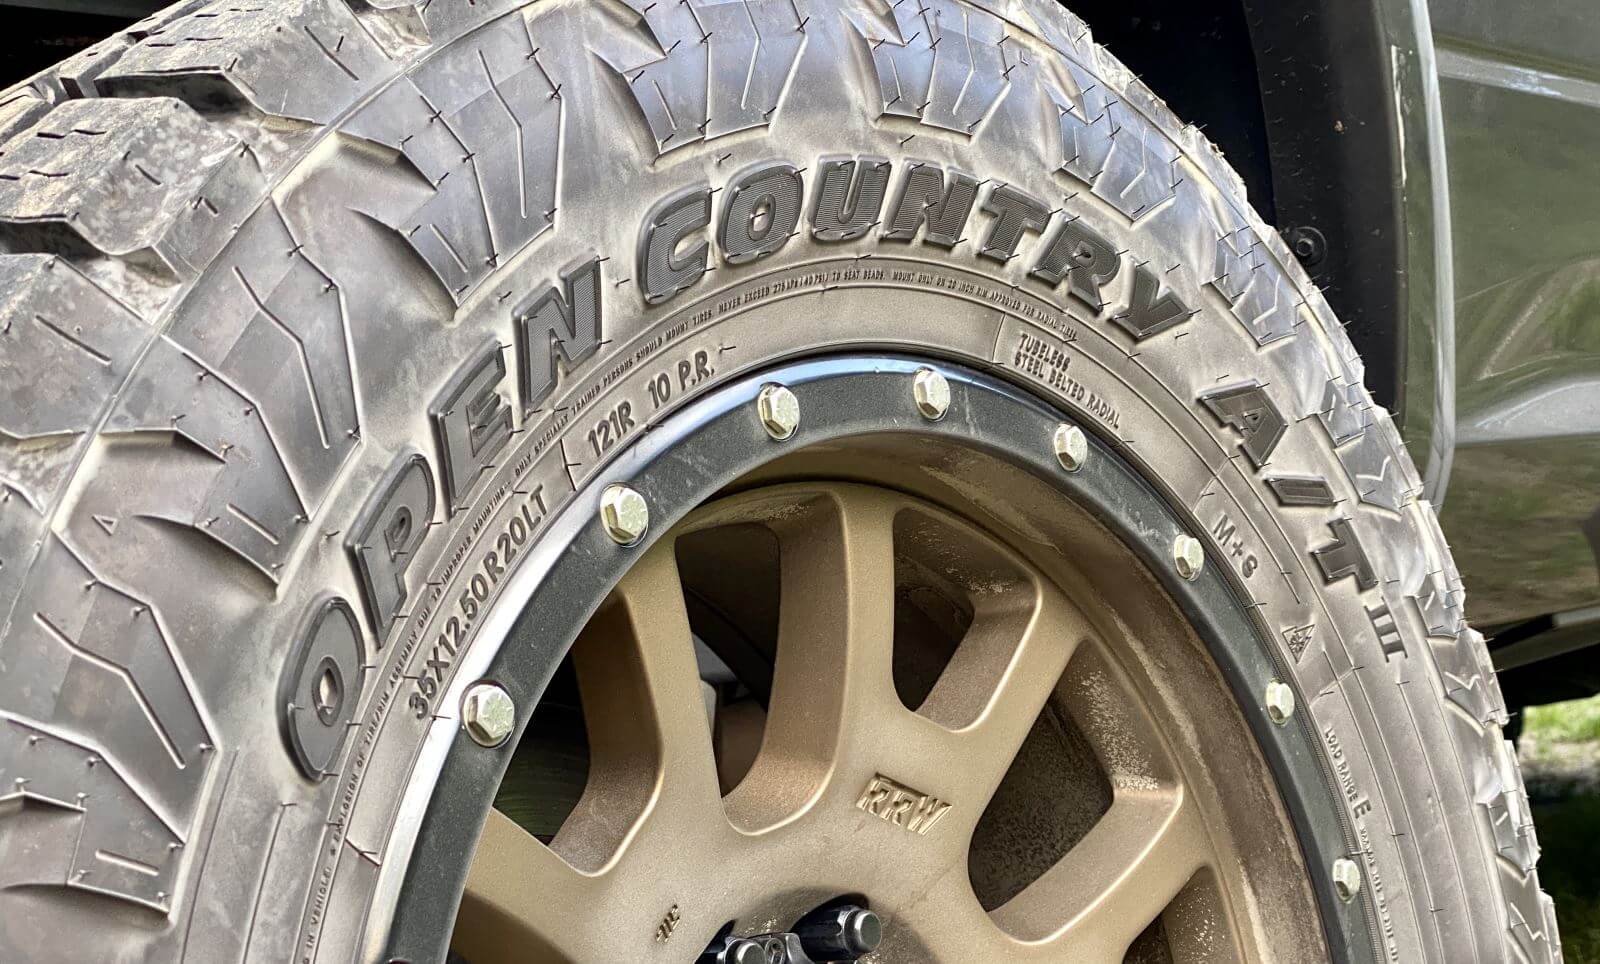 TOYO® OPEN COUNTRY A/T III - 235/60R17 102H